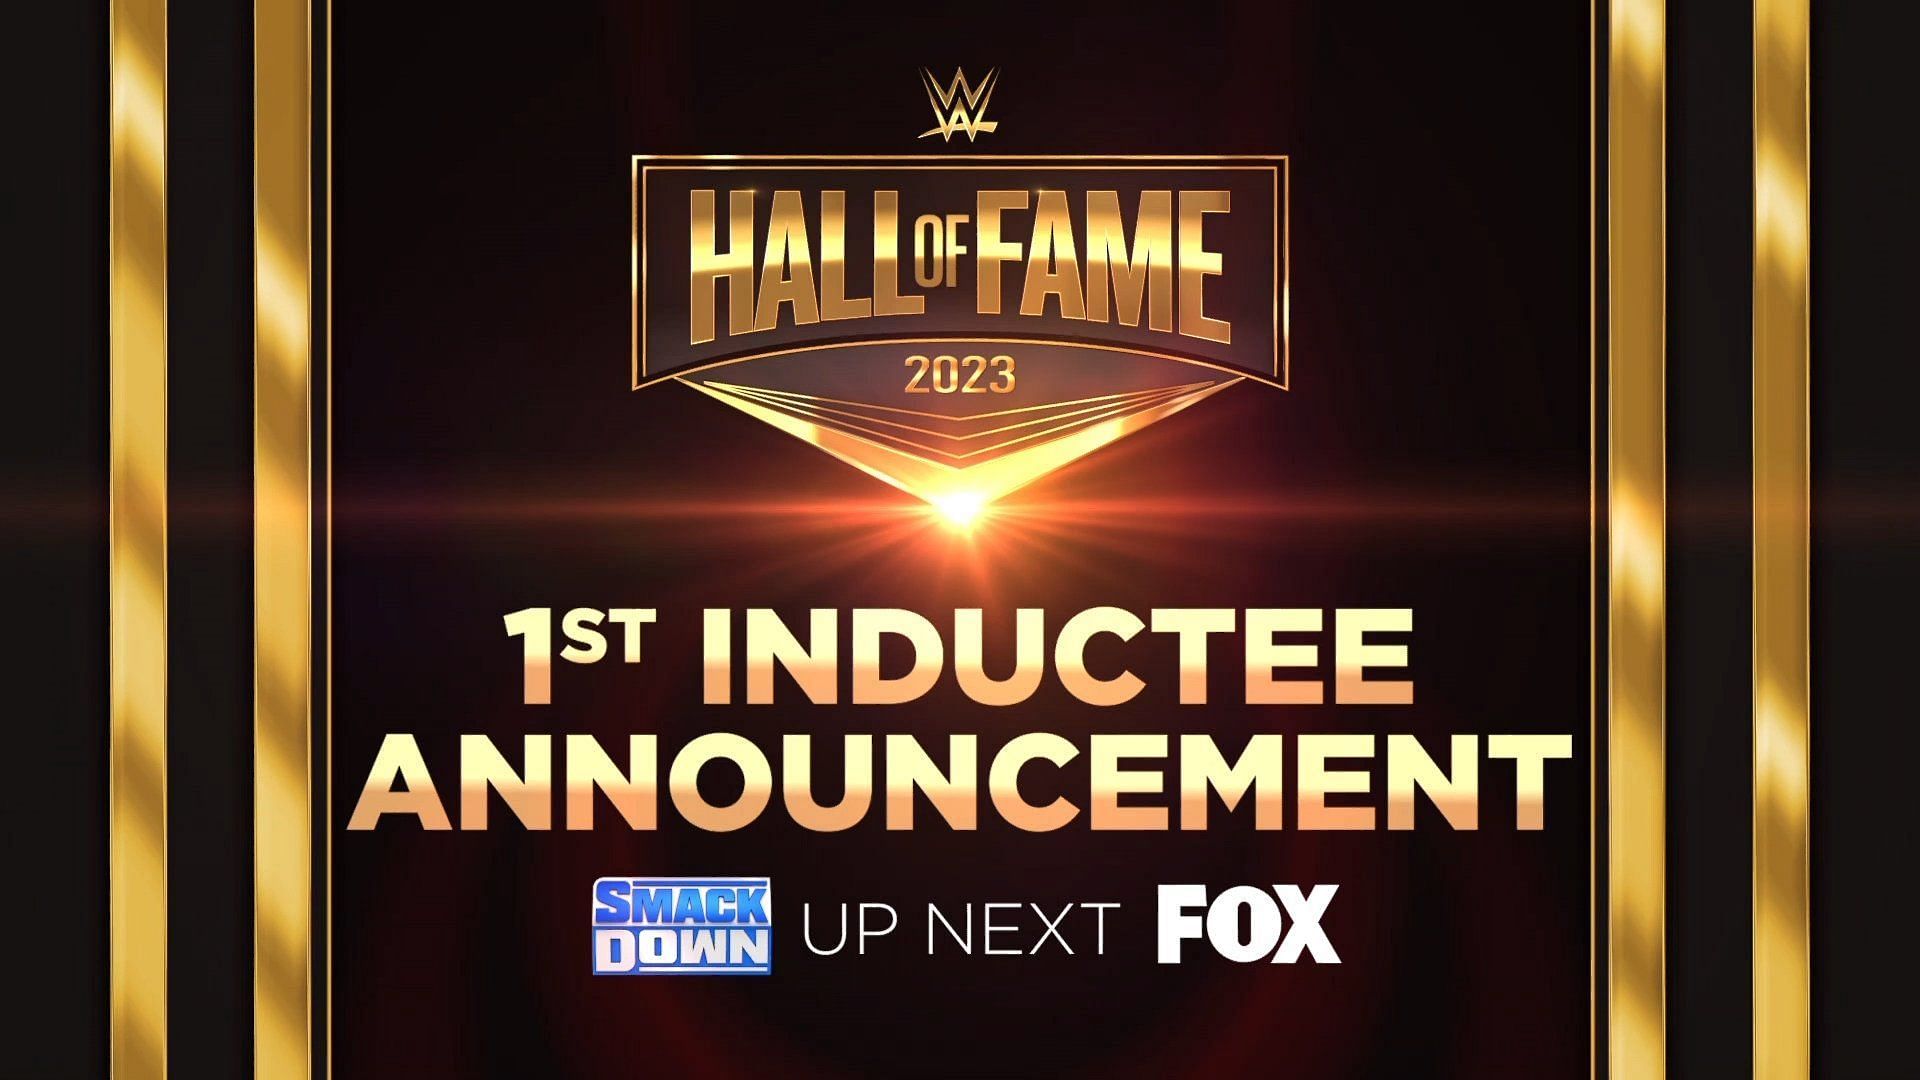 WWE announced legendary luchador as the first inductee of 2023 Hall of Fame.